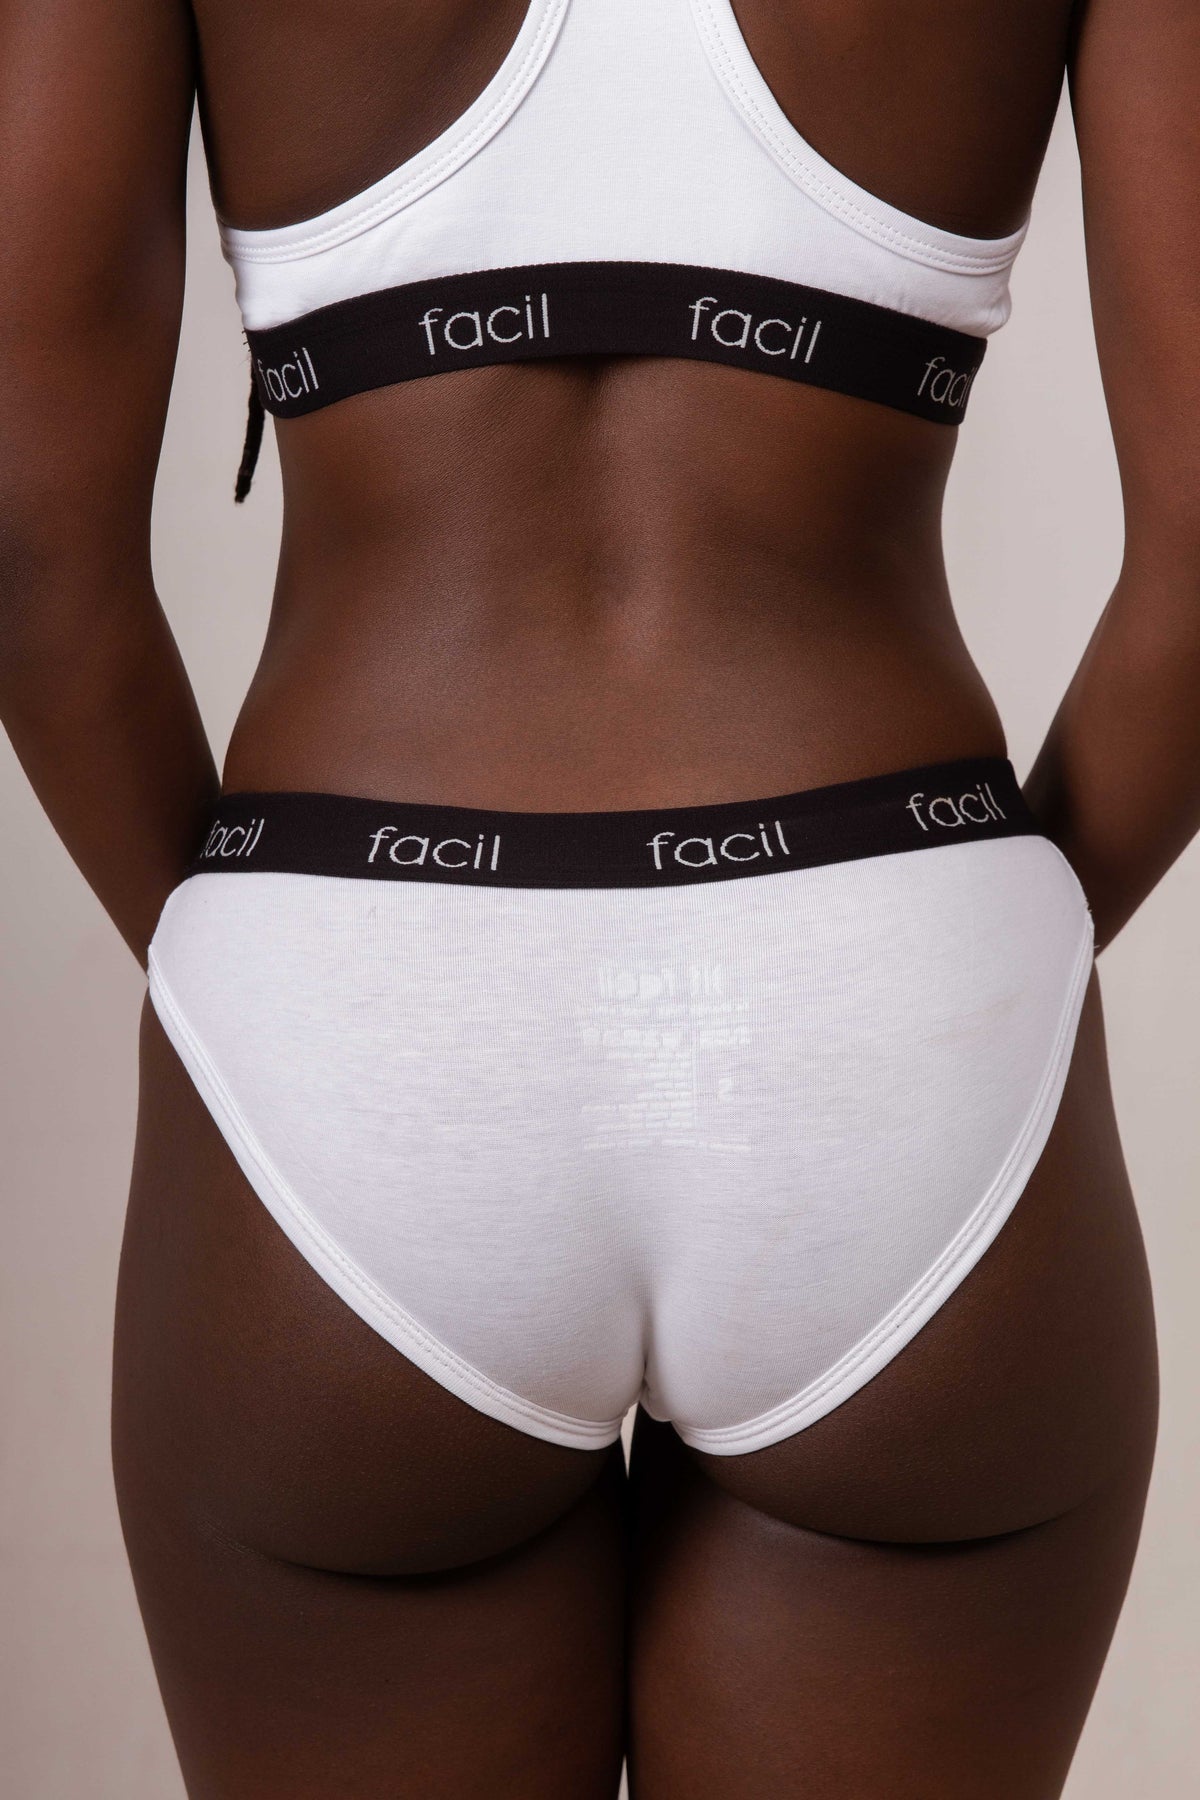 a woman wearing a white underwear with facil branded waistband